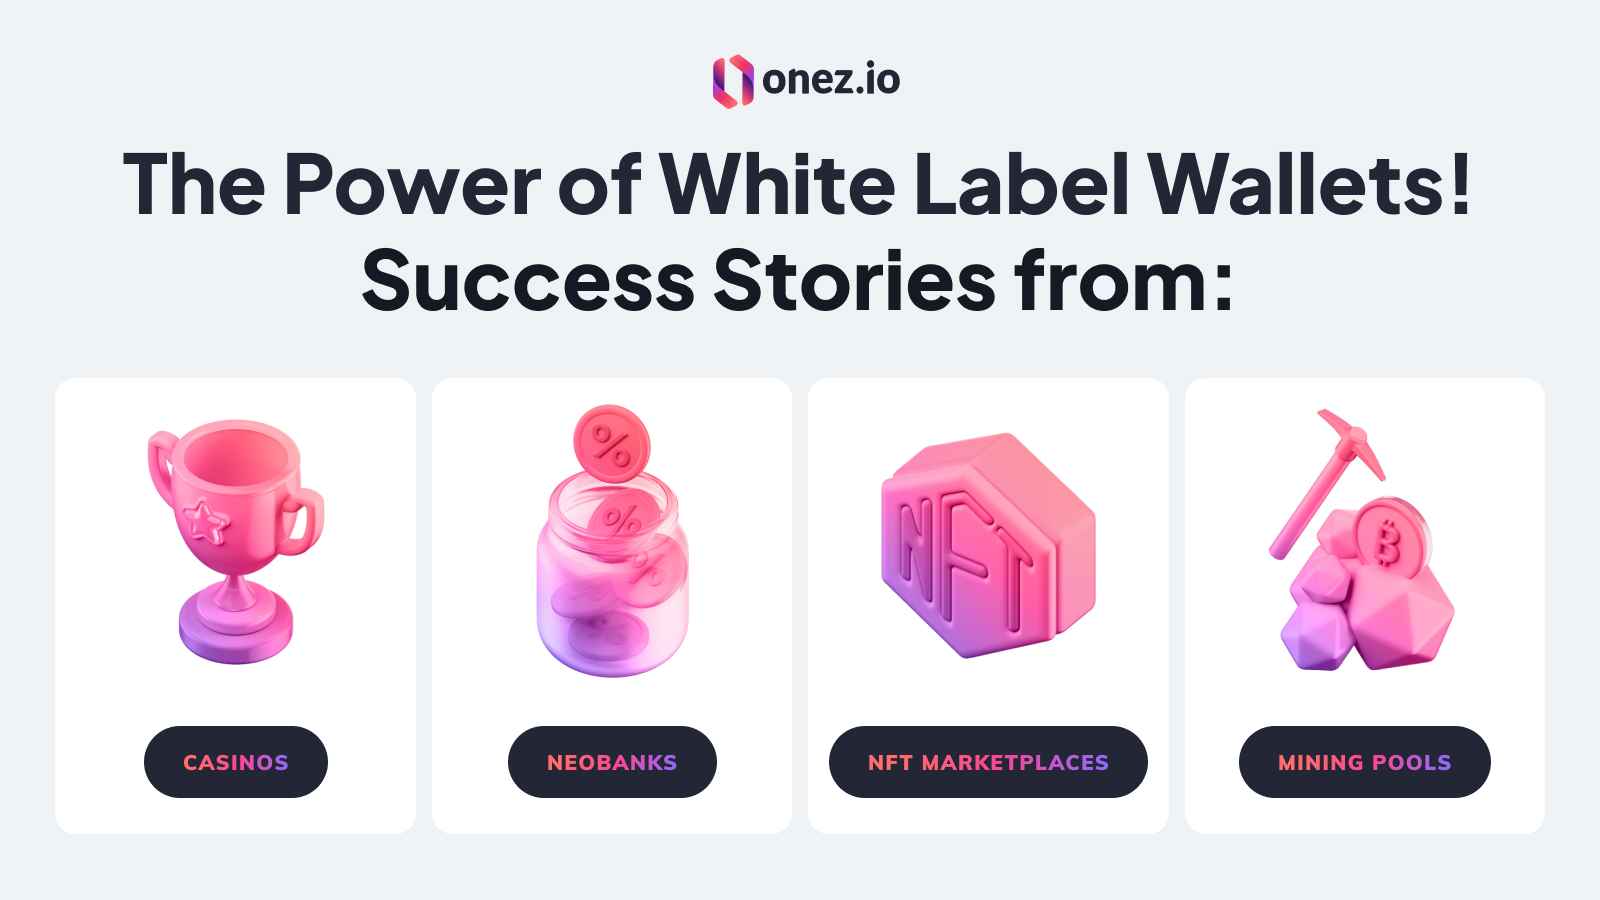 Explore the transformative power of Onez's White Label Crypto Wallet through real-world success stories. Learn how businesses from casinos, NeoBanks, NFT marketplaces, and mining pools leverage this versatile tool to overcome challenges and achieve their goals.